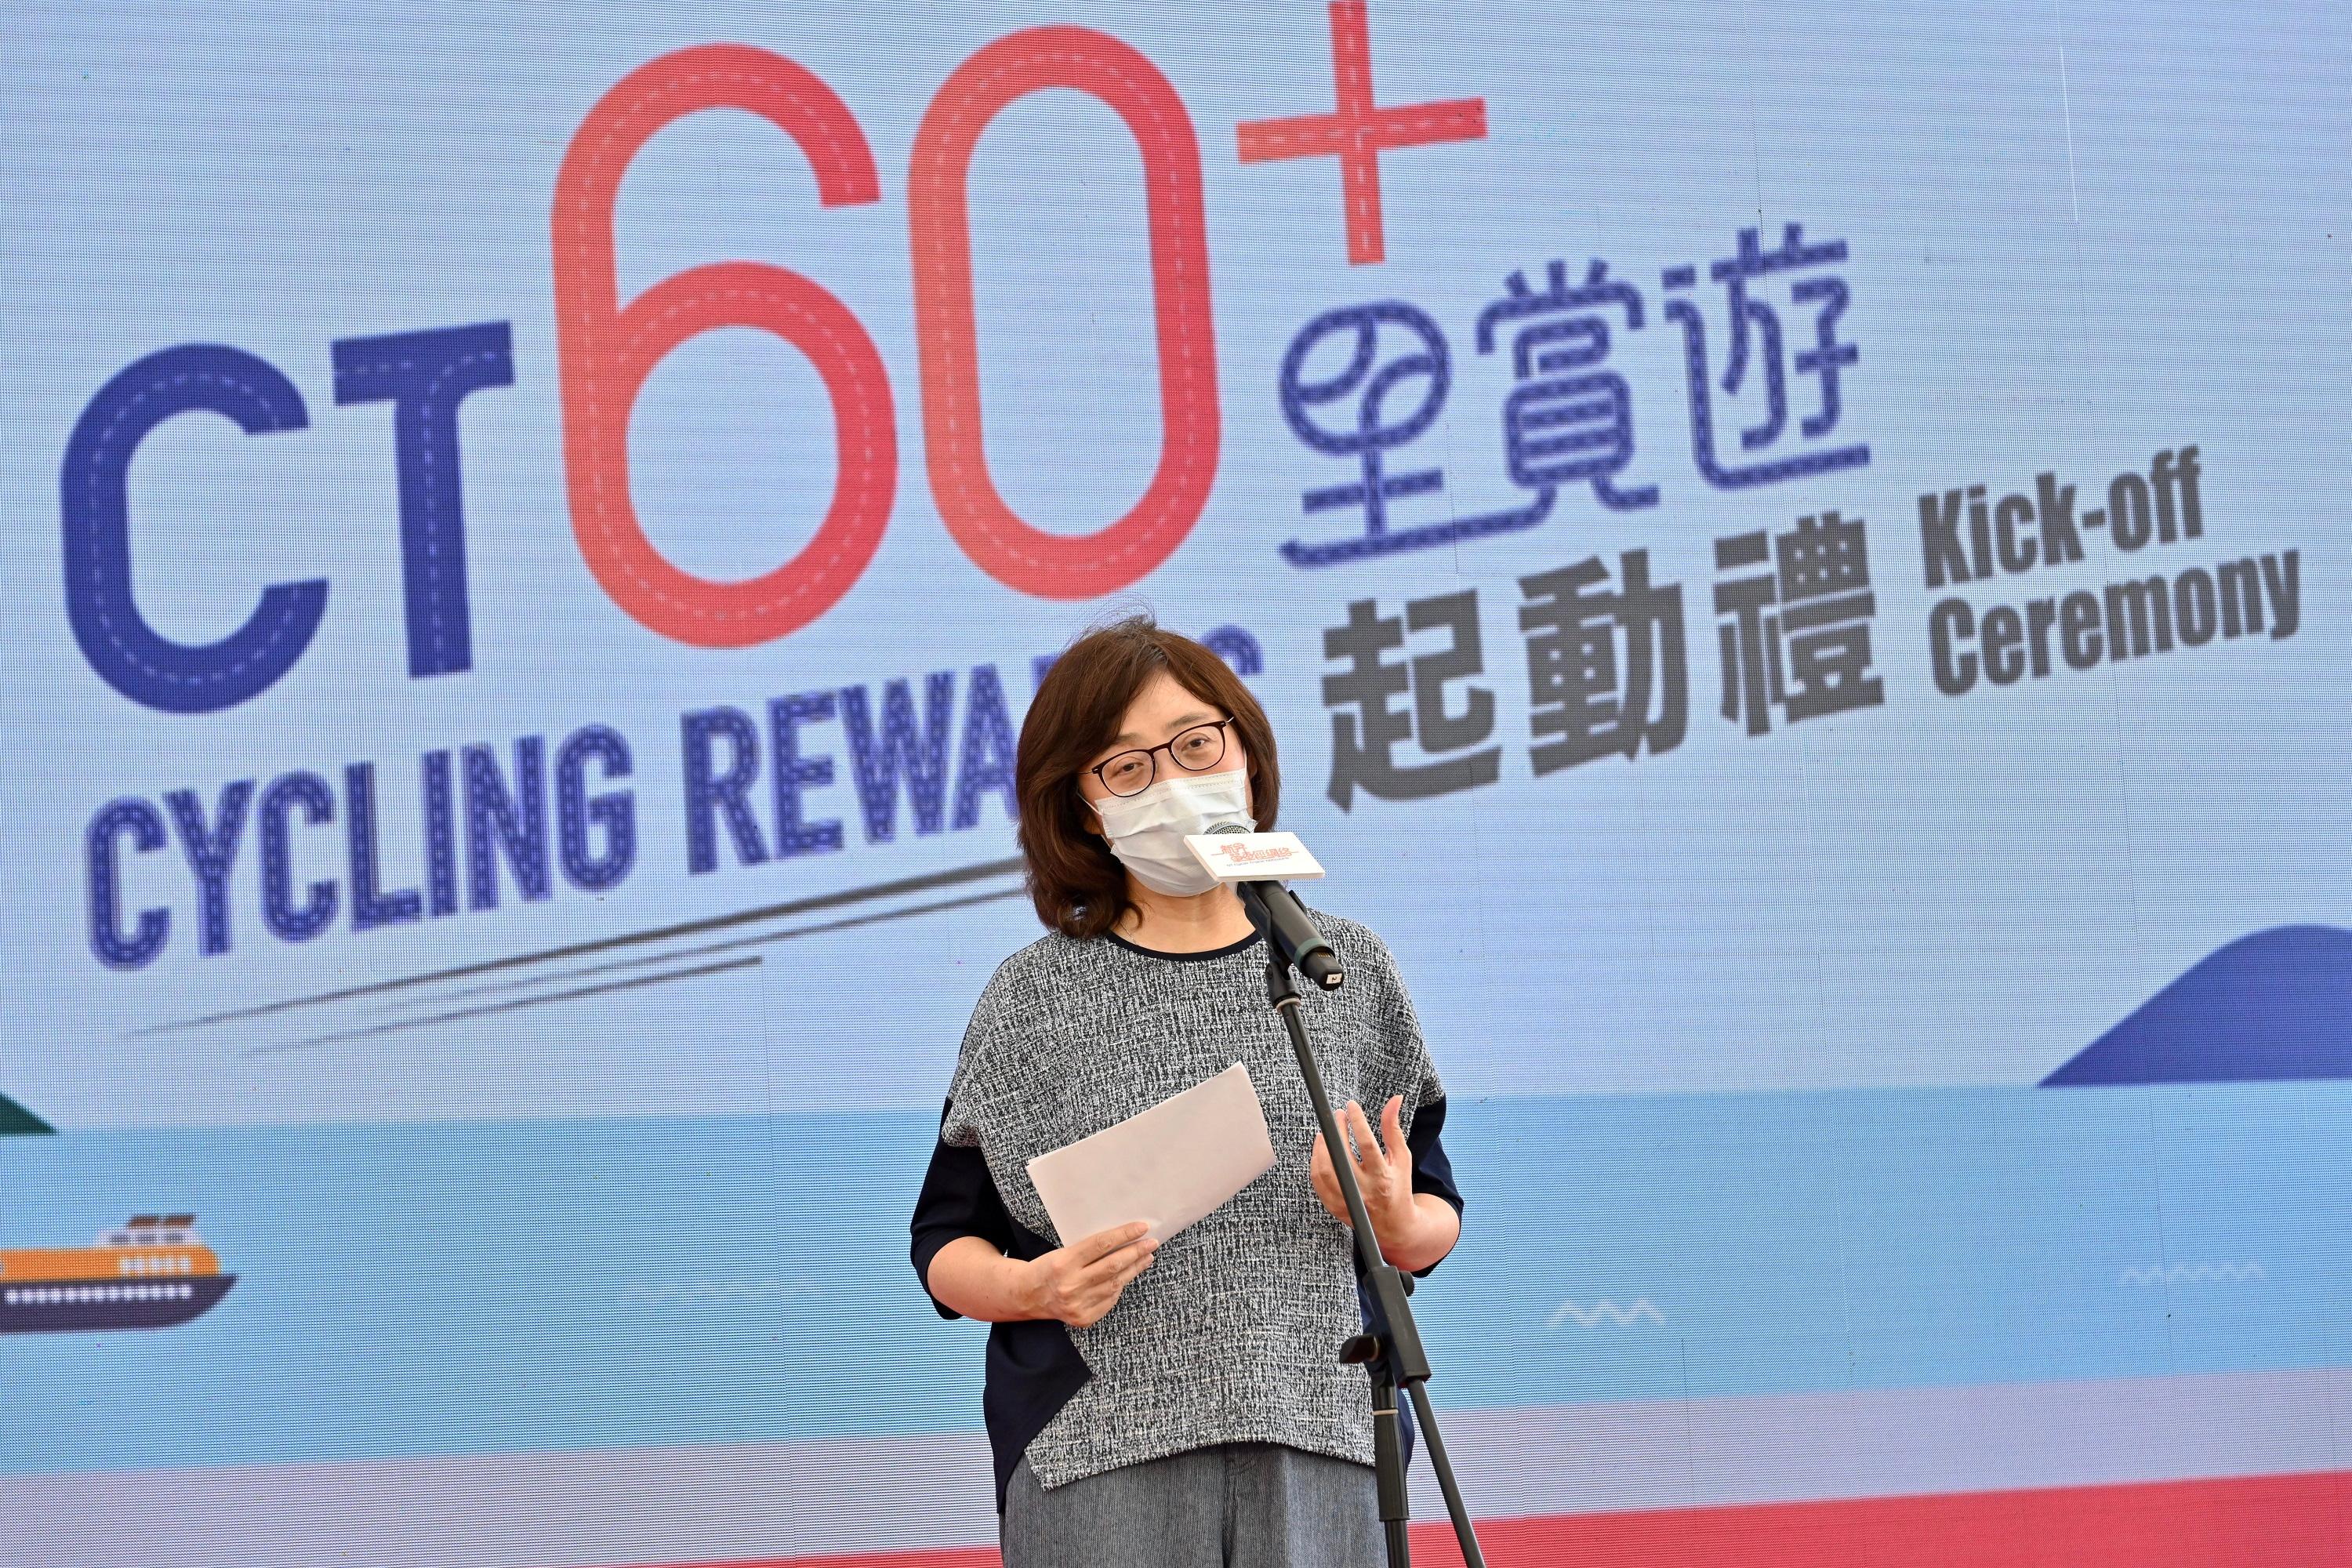 The Secretary for Development, Ms Bernadette Linn, speaks at the New Territories Cycle Track Network CT60+ Cycling Rewards kick-off ceremony today (September 17).